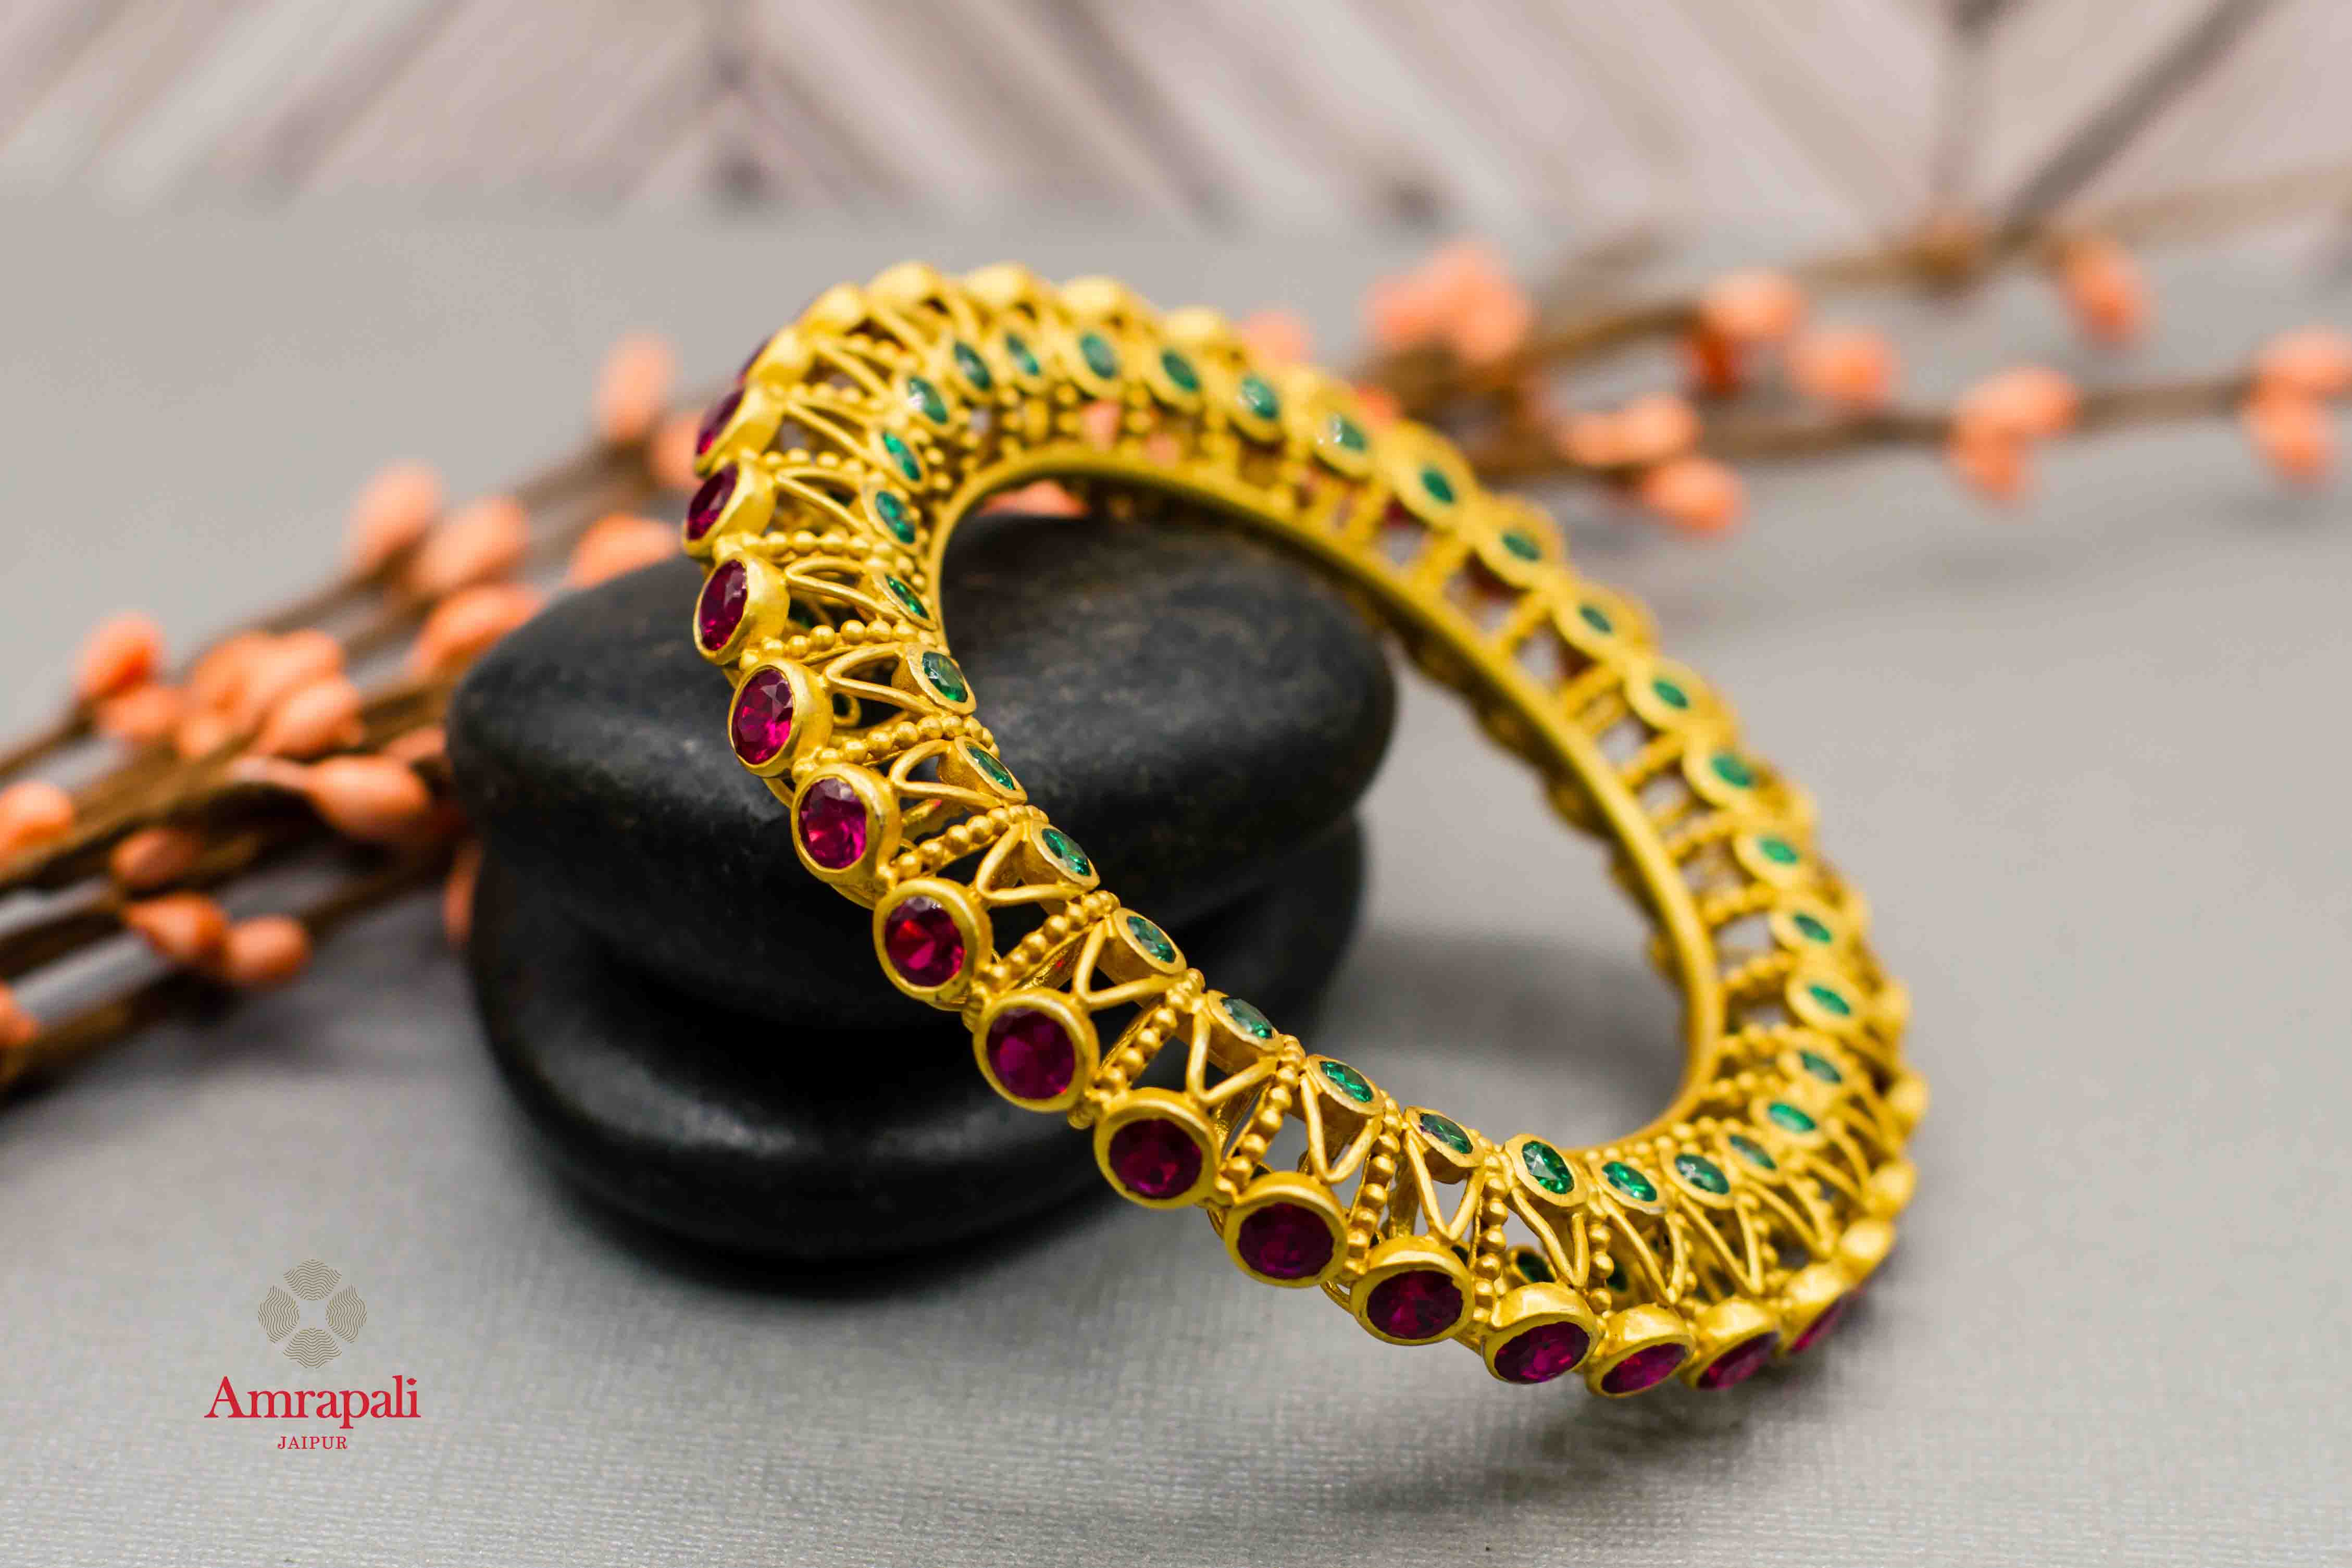 Buy Amrapali colored stones silver gold plated bangle online in USA. Complete your ethnic look with traditional Indian jewelry from Pure Elegance Indian fashion store in USA. Shop silver jewelry, wedding jewelry for Indian brides in USA from our online store.-front